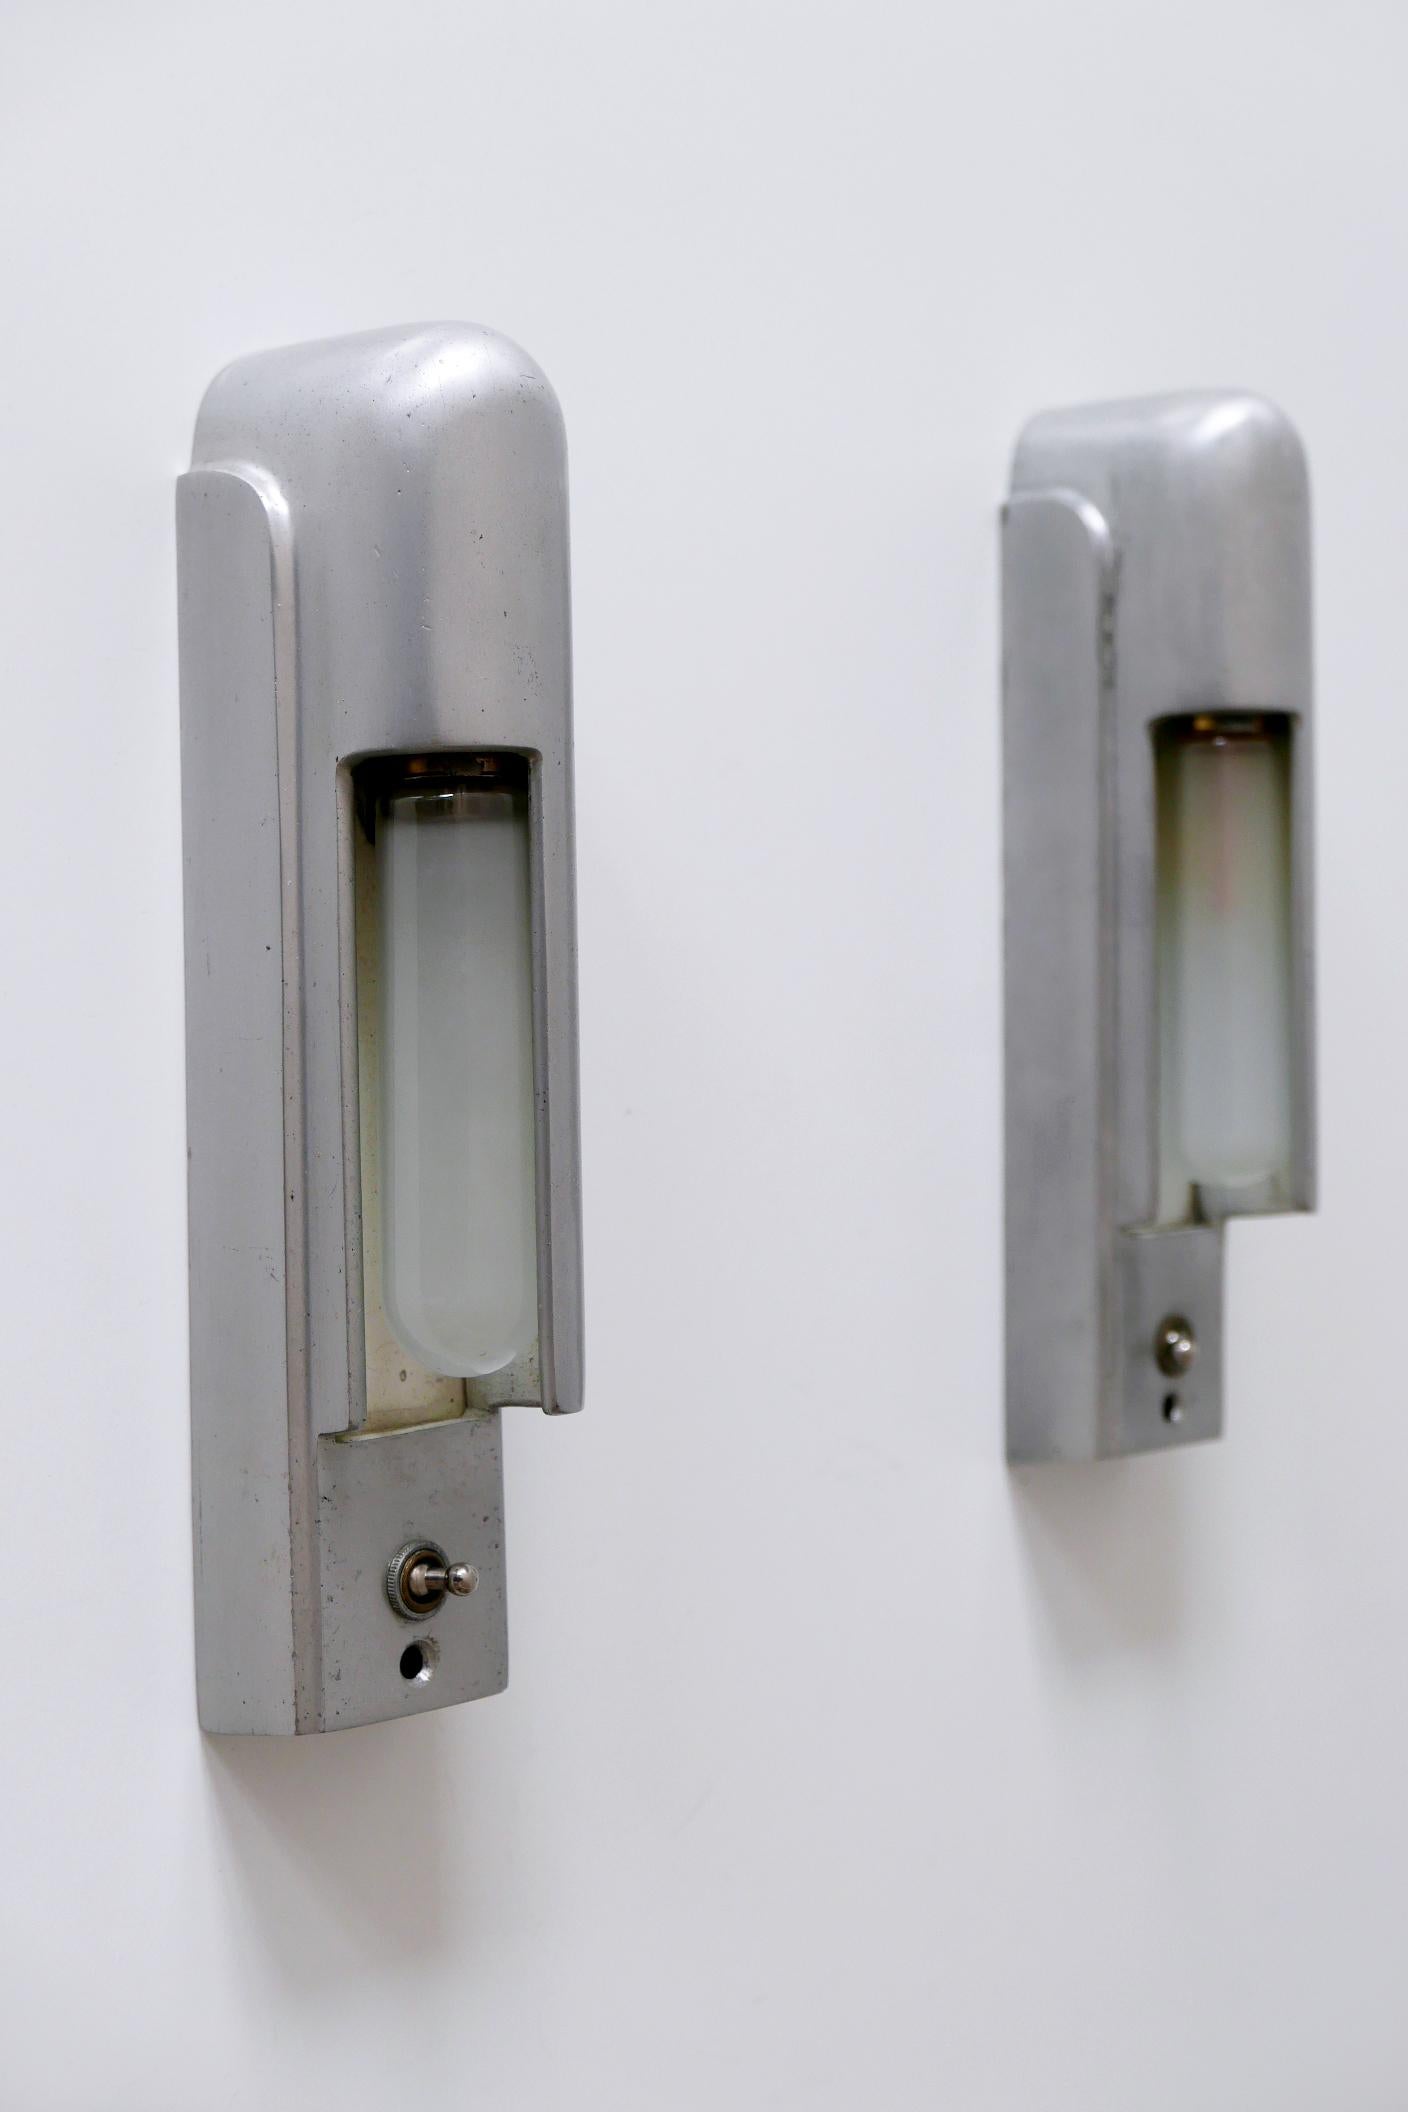 Aluminum Rare Set of Two Streamline Cruise Ship Cabin Sconces by The Simes Co NY, 1930s For Sale